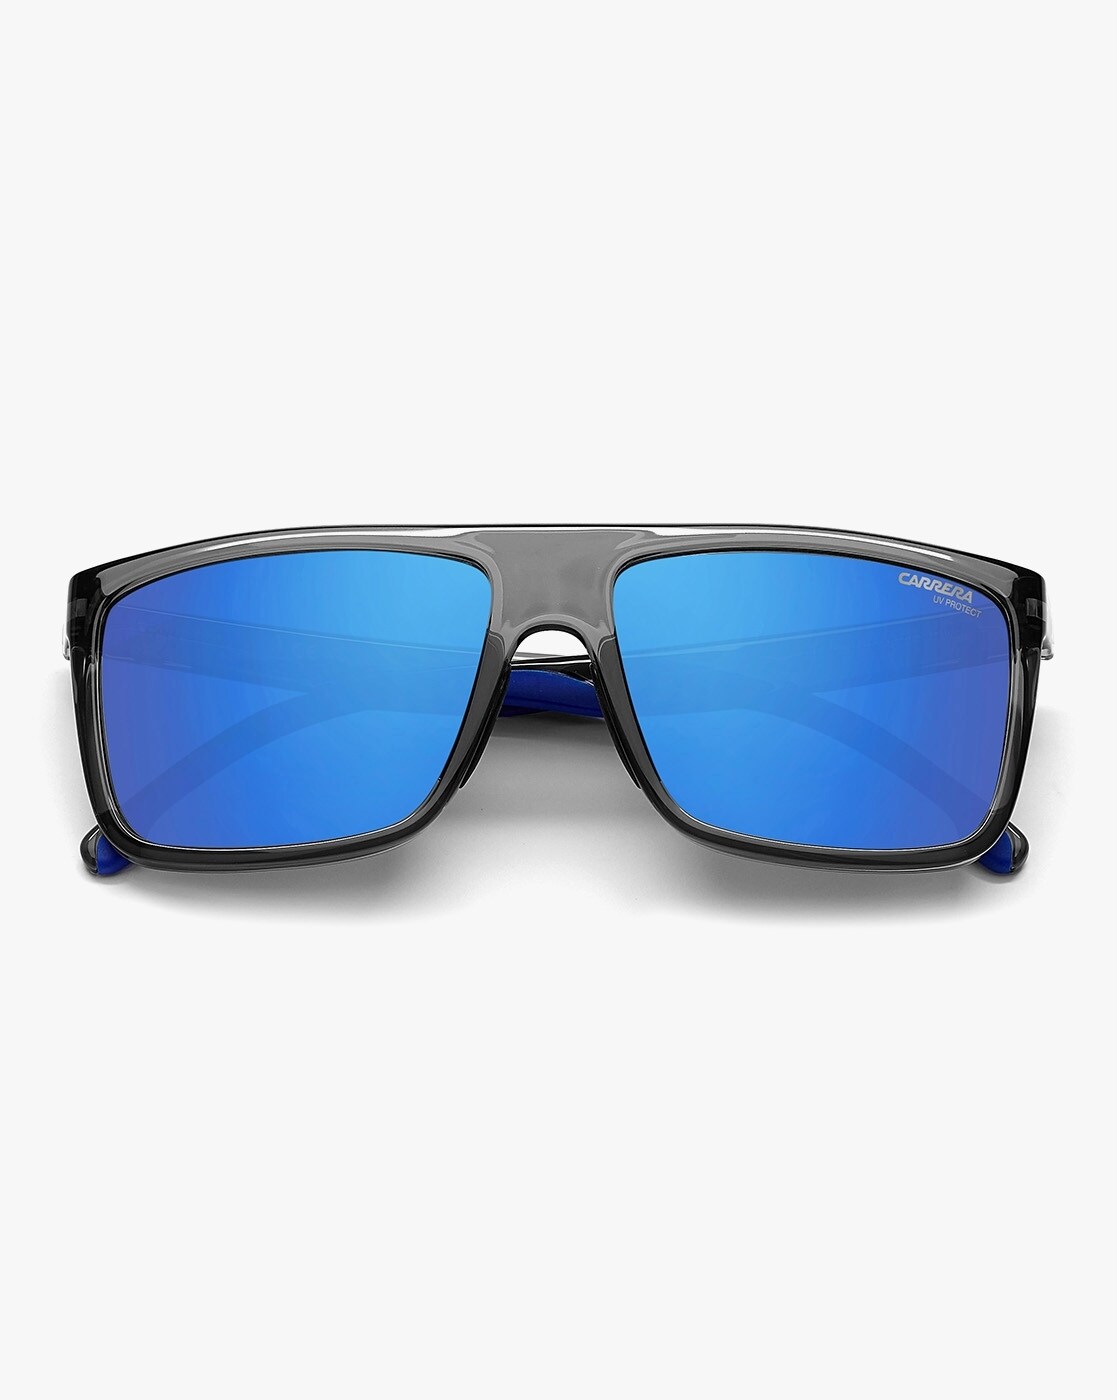 Buy Blue Sunglasses for Men by CARRERA Online 